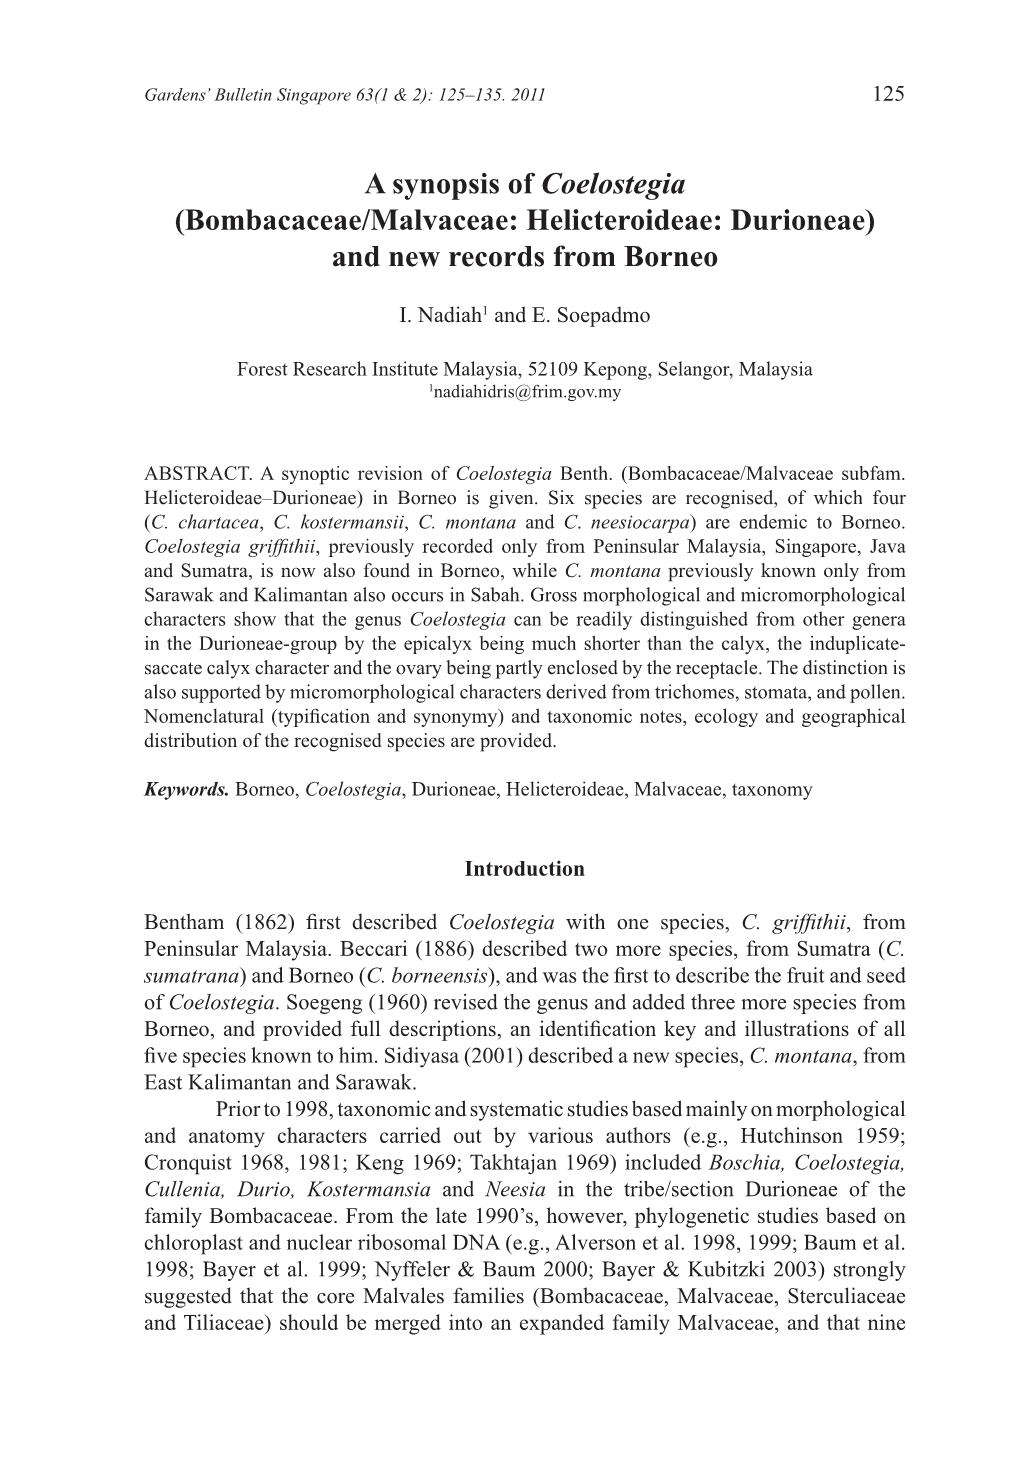 Bombacaceae/Malvaceae: Helicteroideae: Durioneae) and New Records from Borneo